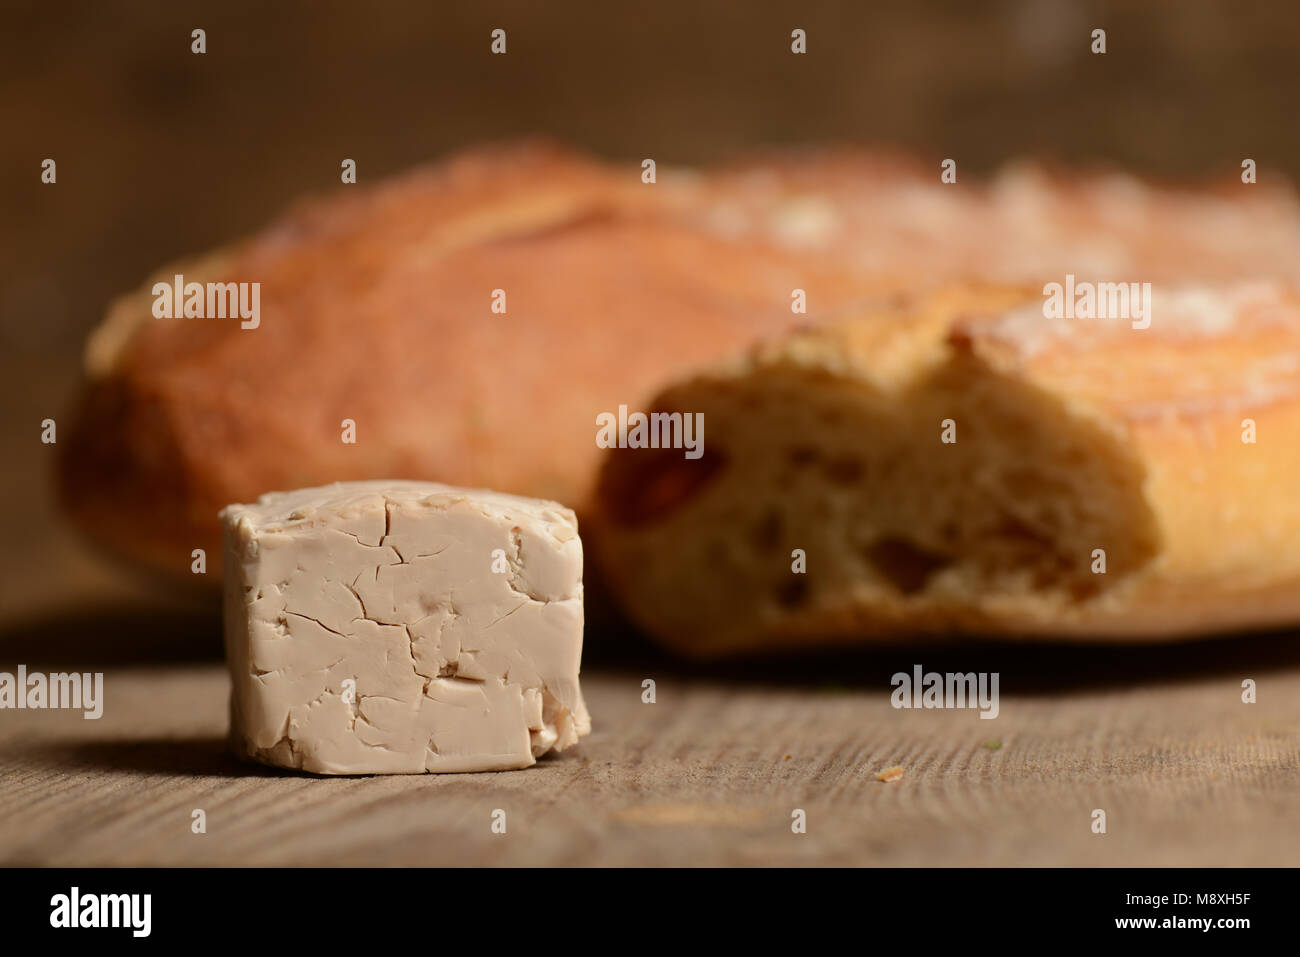 French Bread and fresh yeast on wood Stock Photo